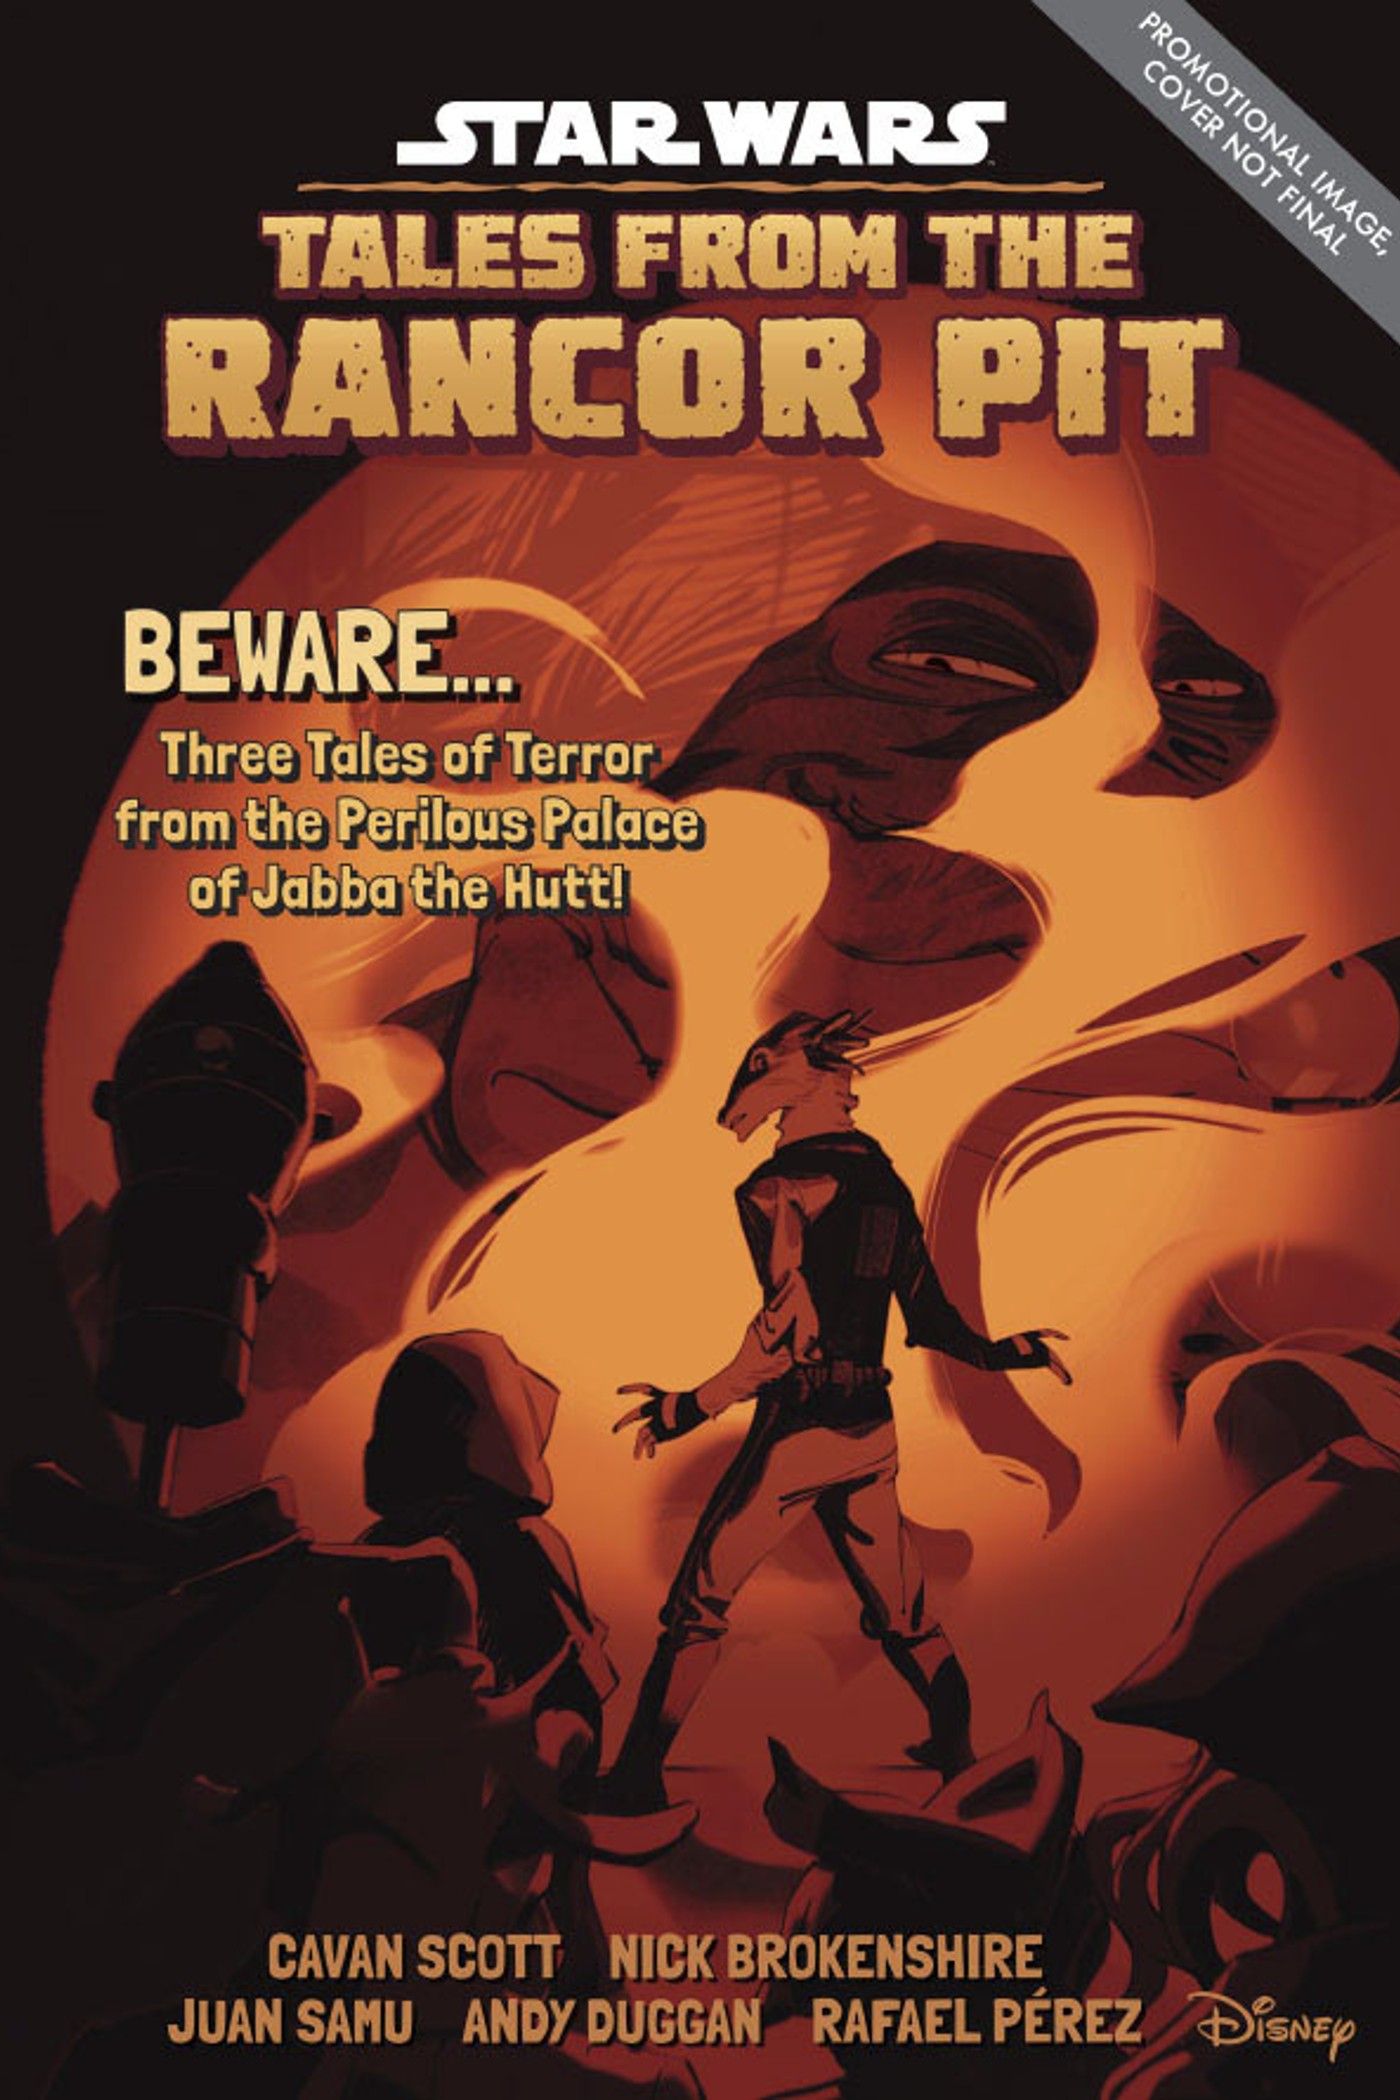 Star Wars’ Next Halloween Special Explores ‘Tales from the Rancor Pit’